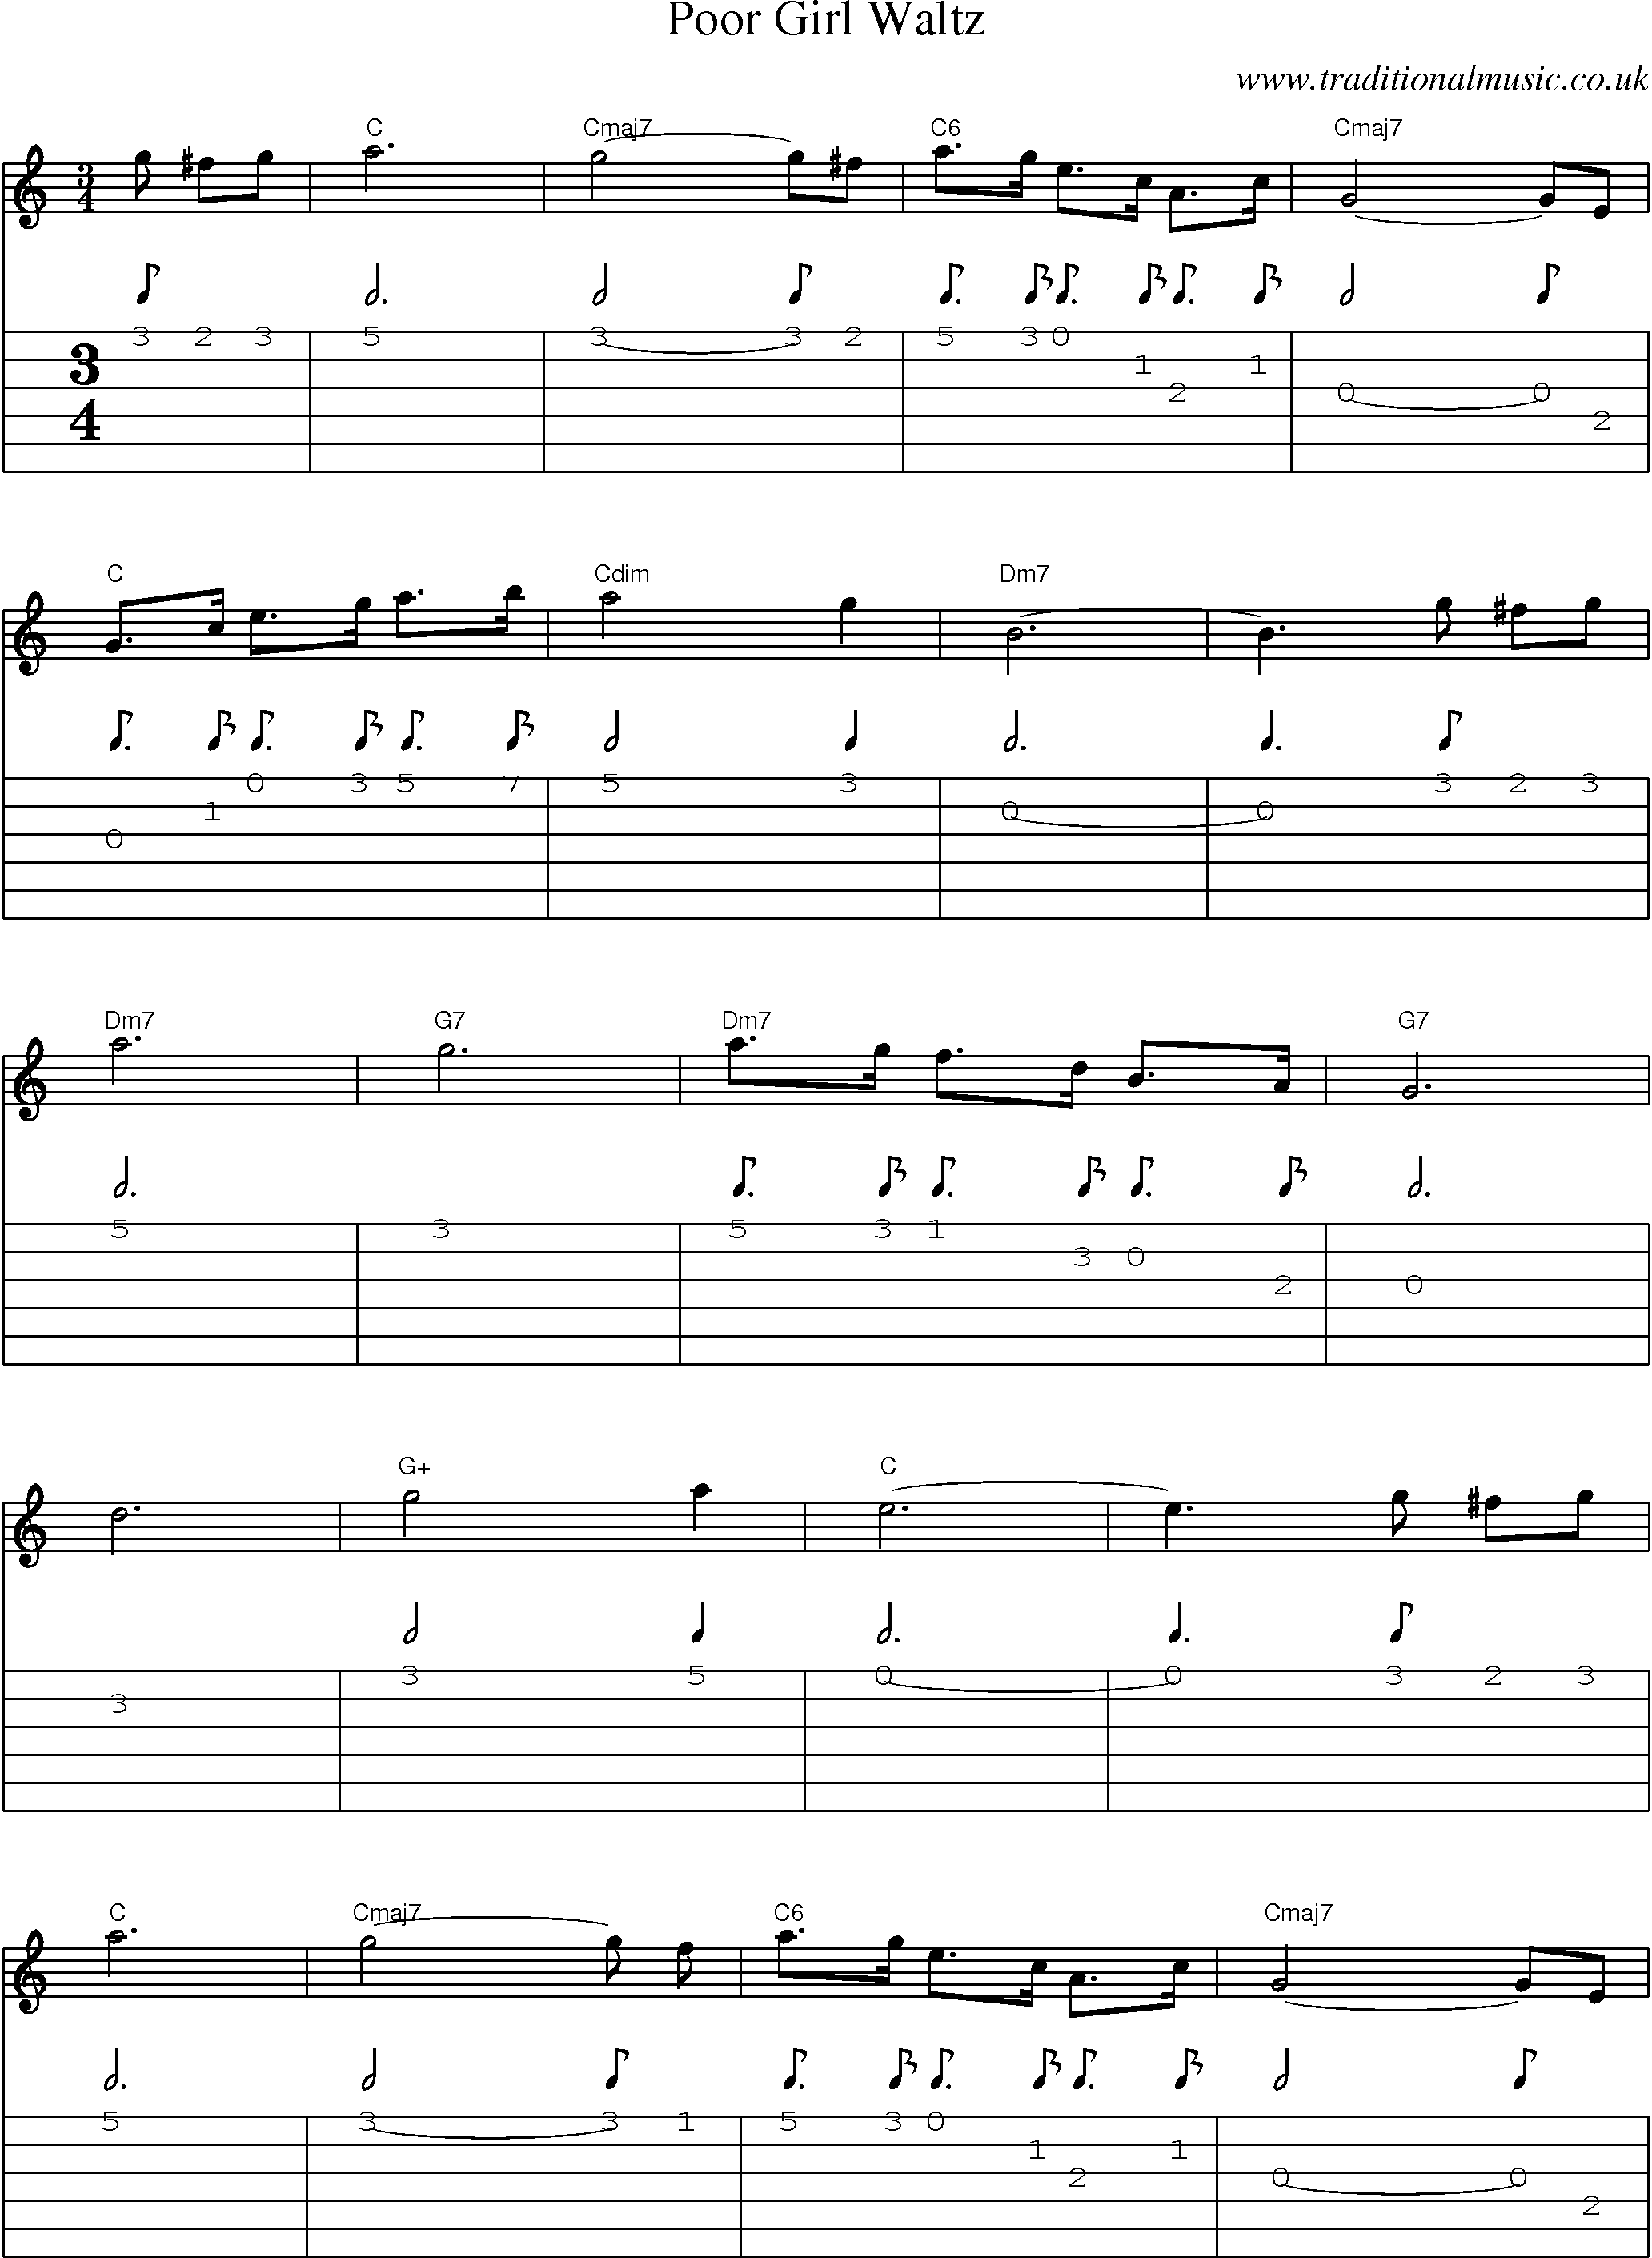 Music Score and Guitar Tabs for Poor Girl Waltz